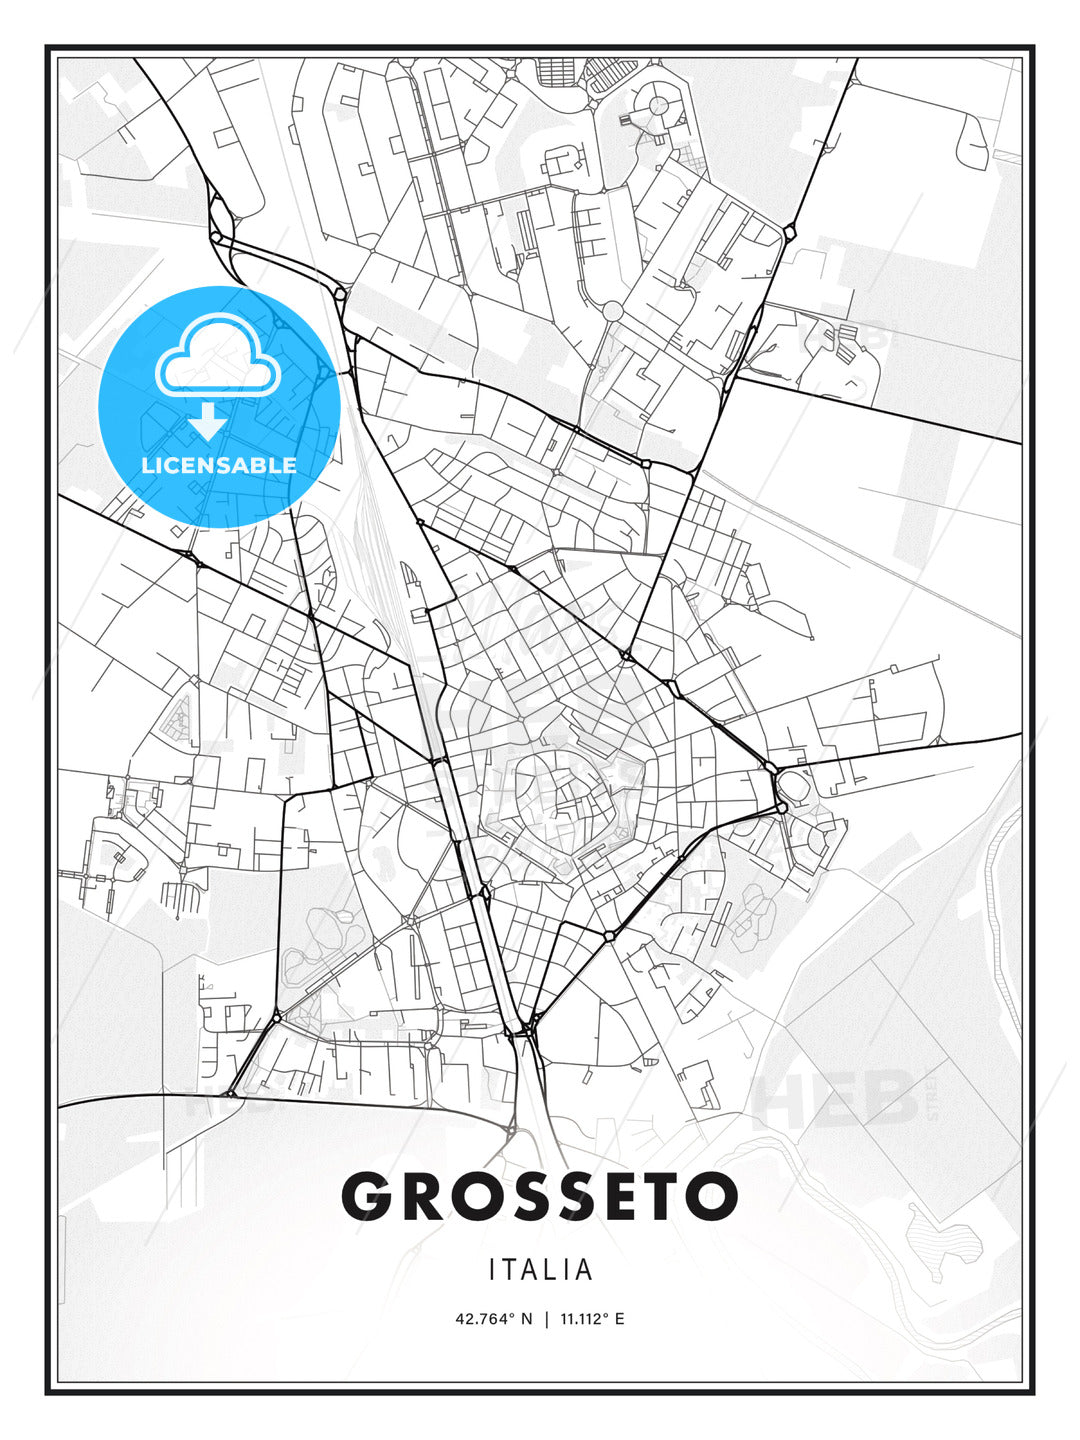 Grosseto, Italy, Modern Print Template in Various Formats - HEBSTREITS Sketches